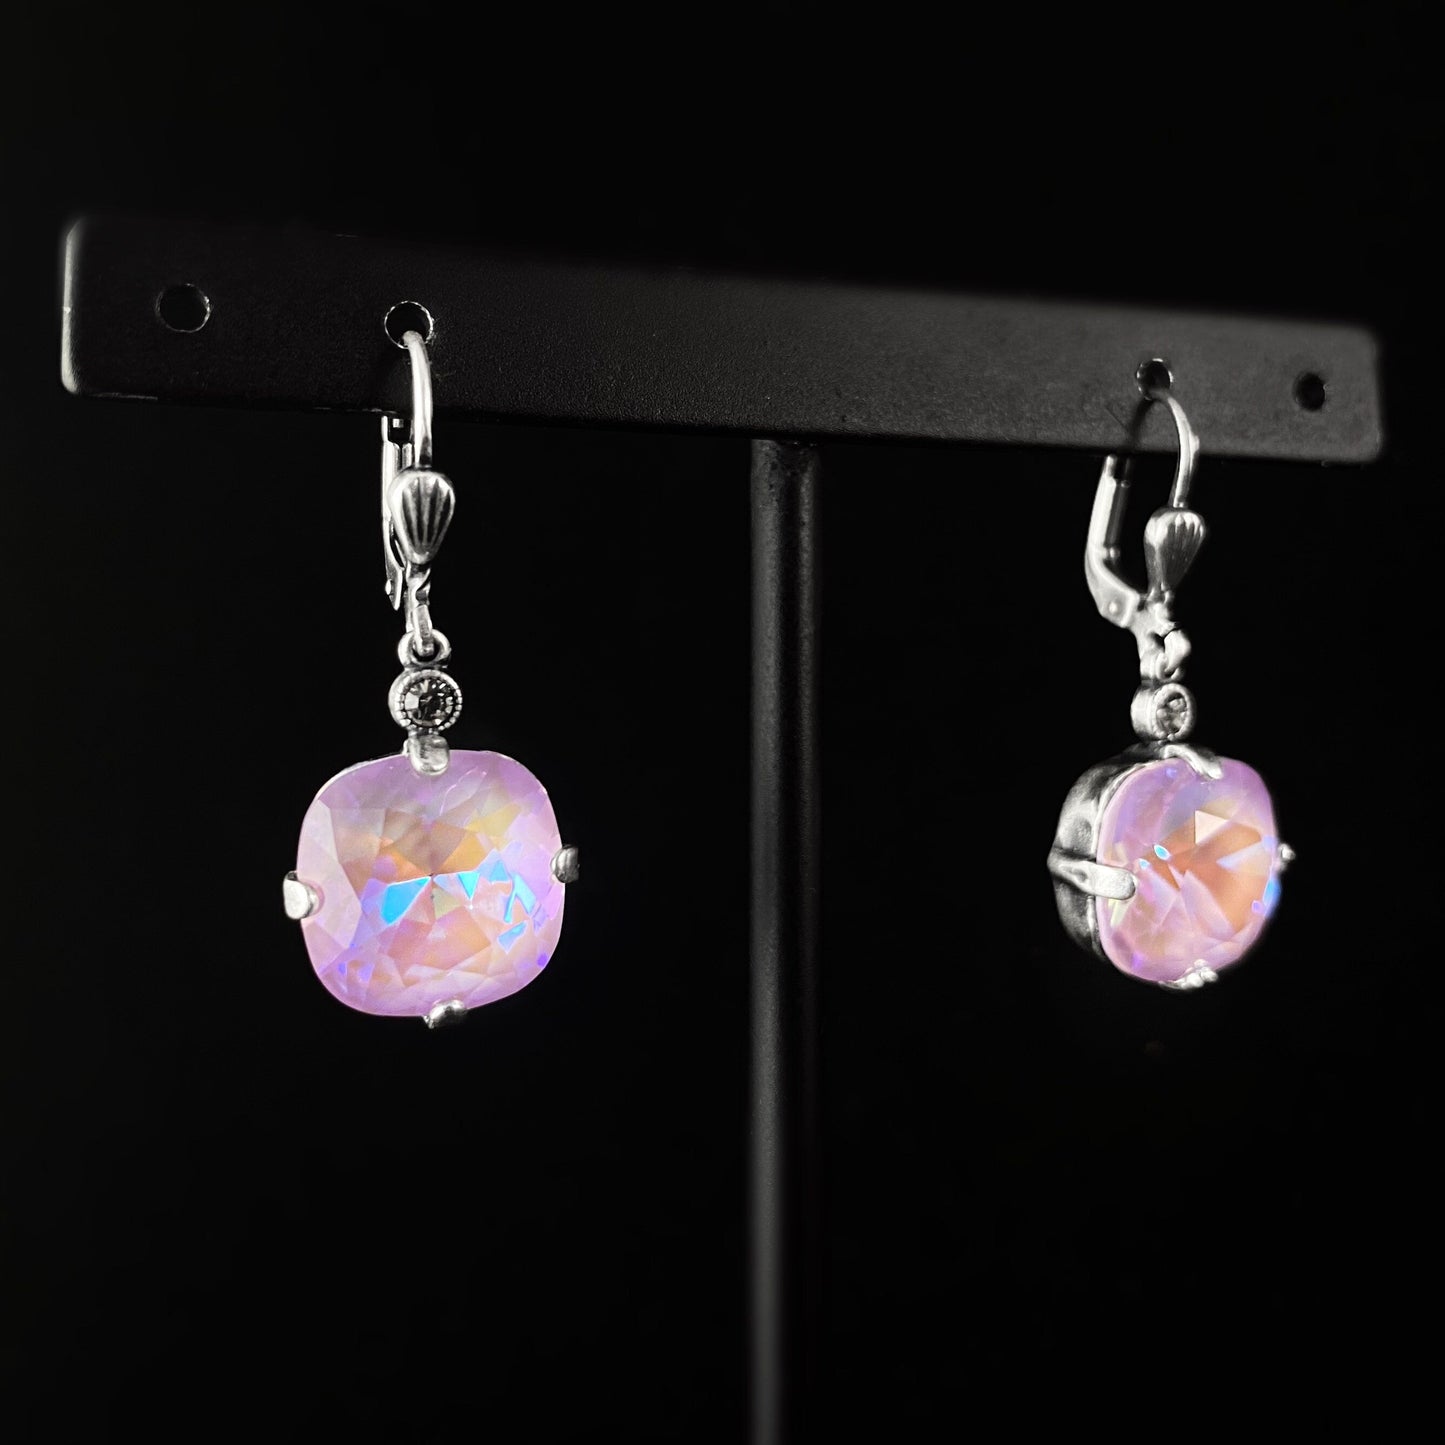 Cushion Cut Swarovski Crystal Drop Earrings, Cotton Candy Pink - La Vie Parisienne by Catherine Popesco